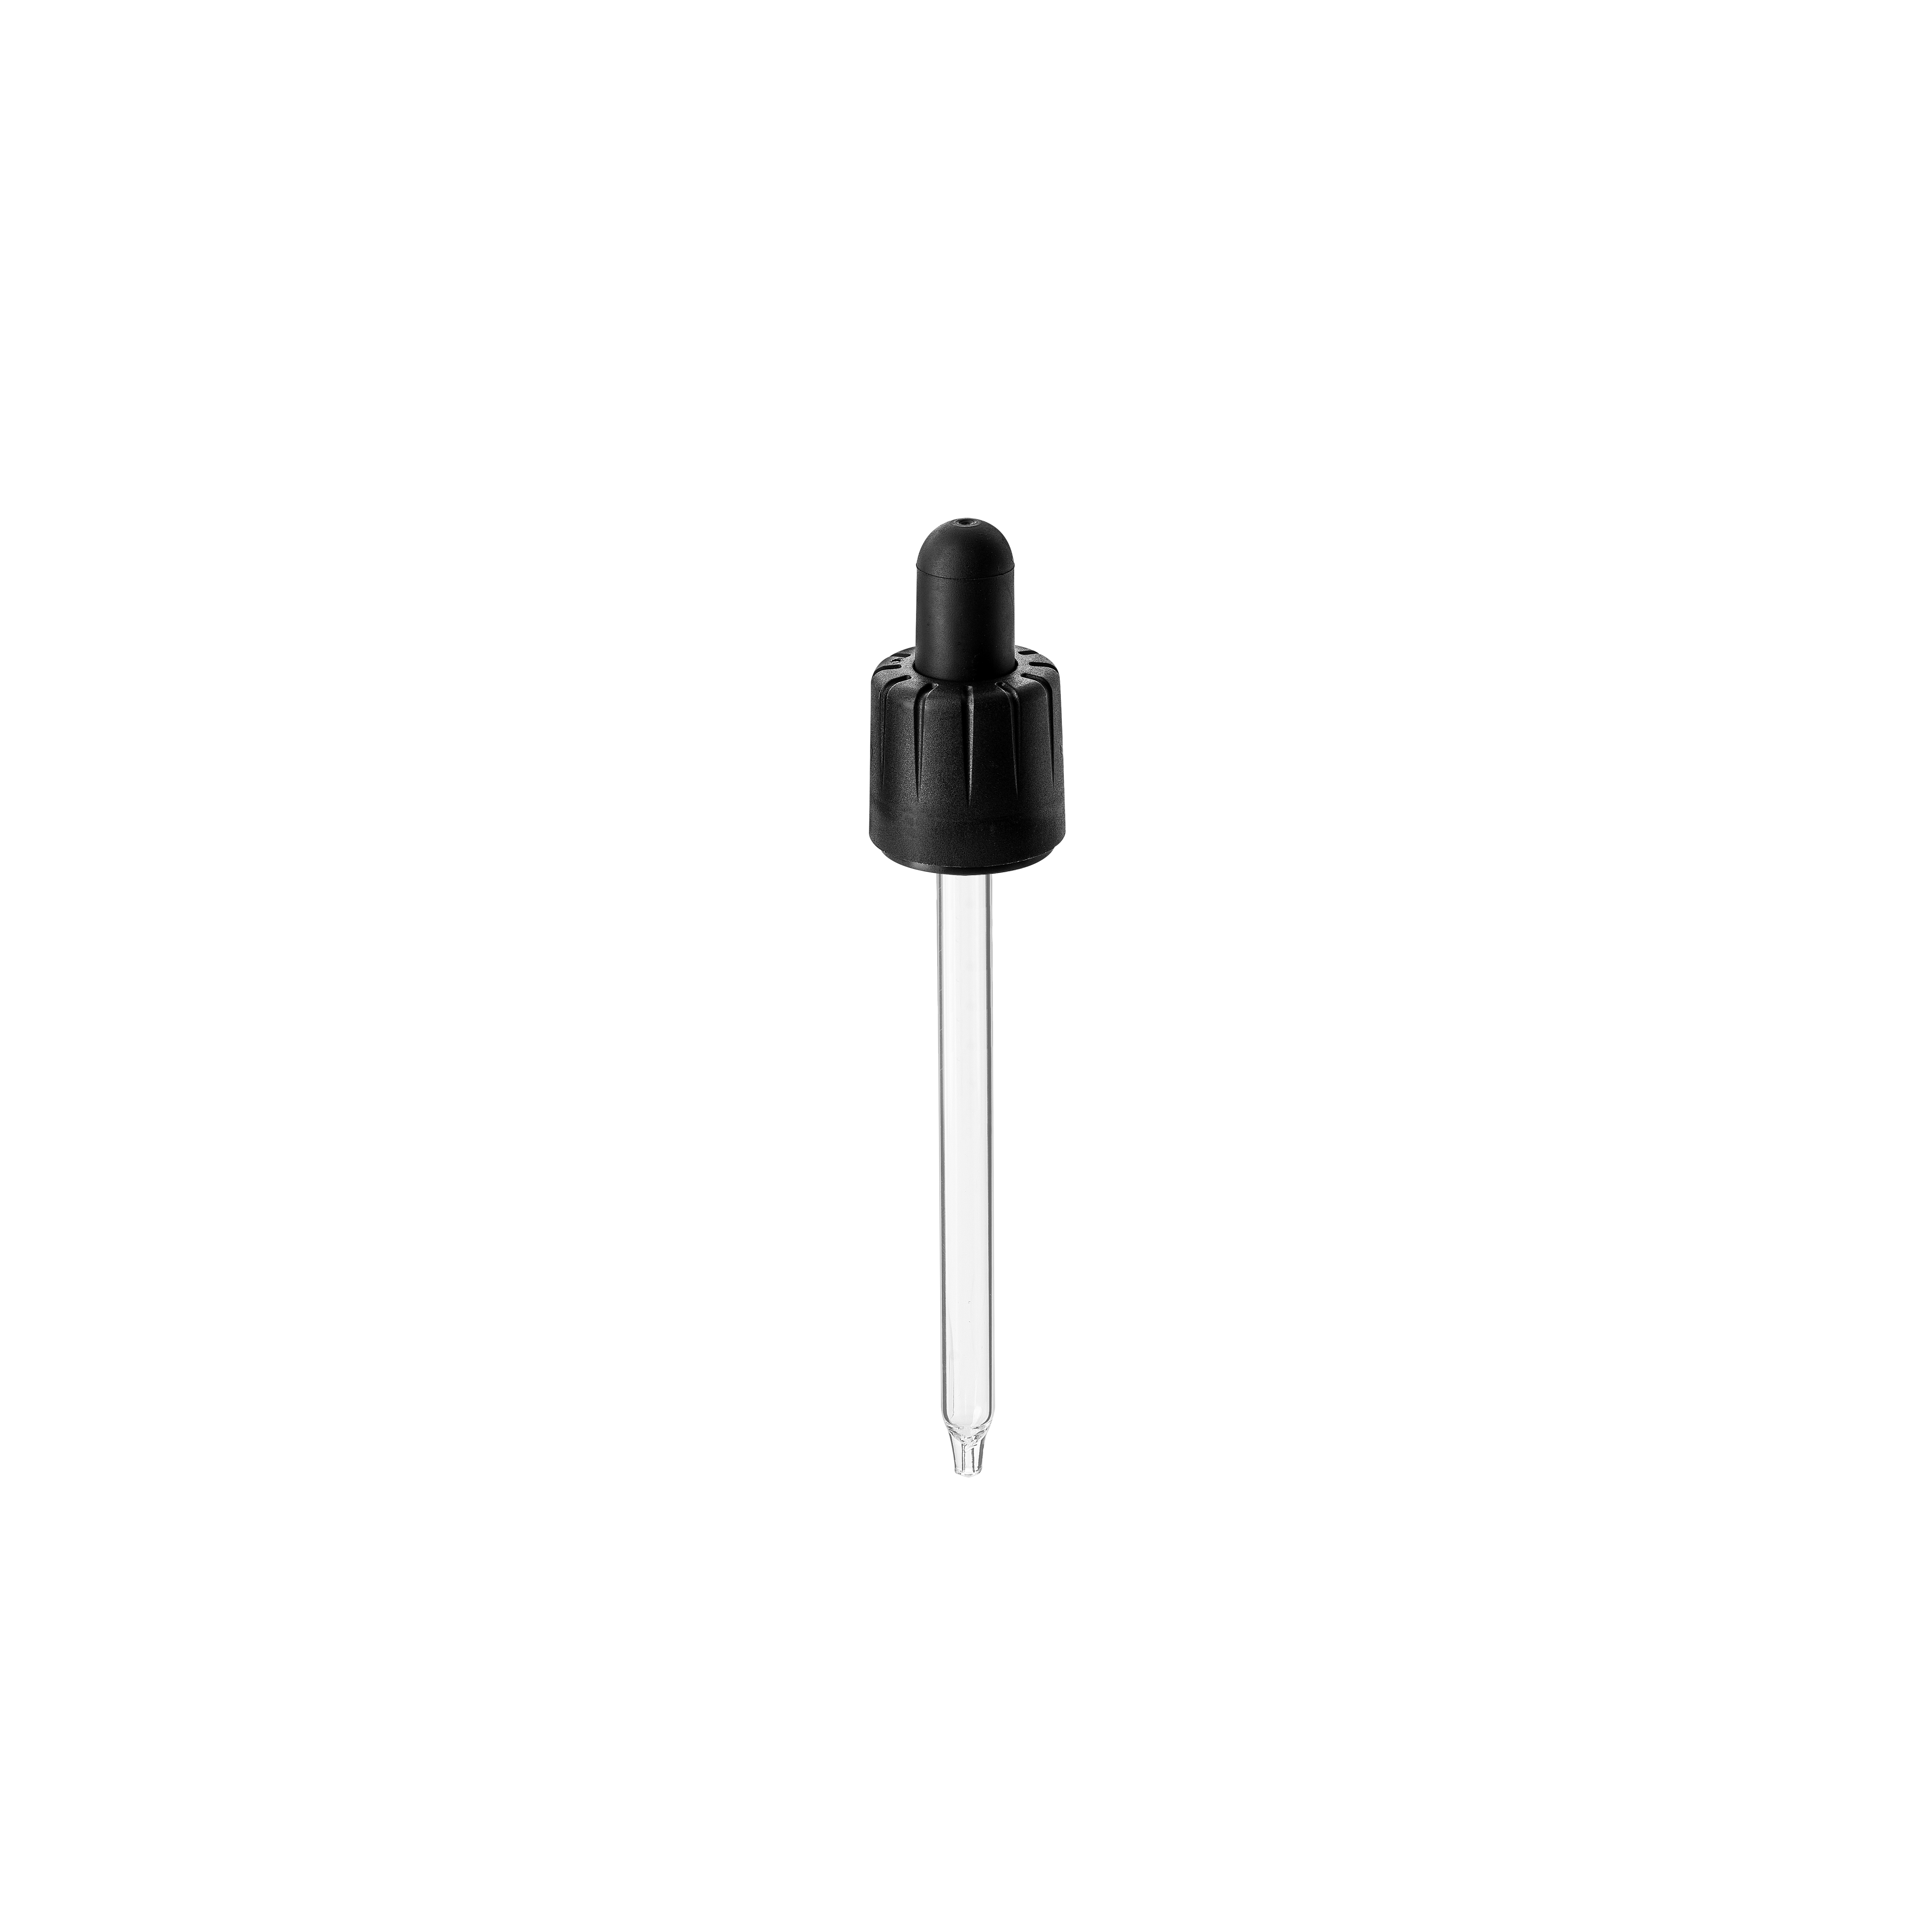 Child-resistant pipette series II, DIN18, tamper-evident, PP/PEHD, black, fine ribbed, black bulb TPE 1.0 ml, conical tip with 1.0 opening for Ginger 100 ml